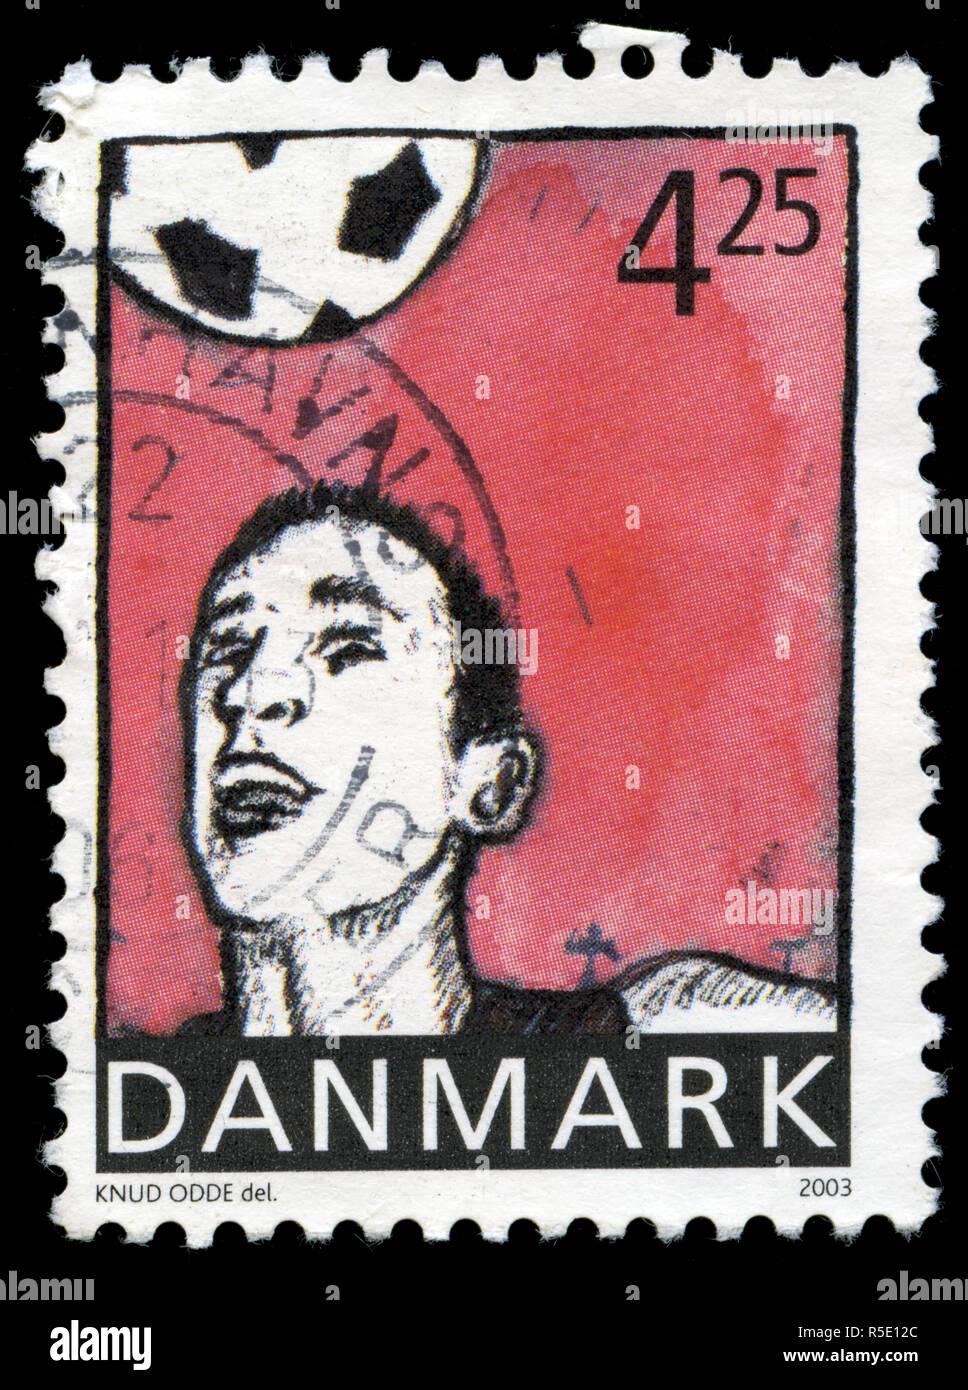 Postage stamp from Denmark in the Sports series issued in 2003 Stock Photo